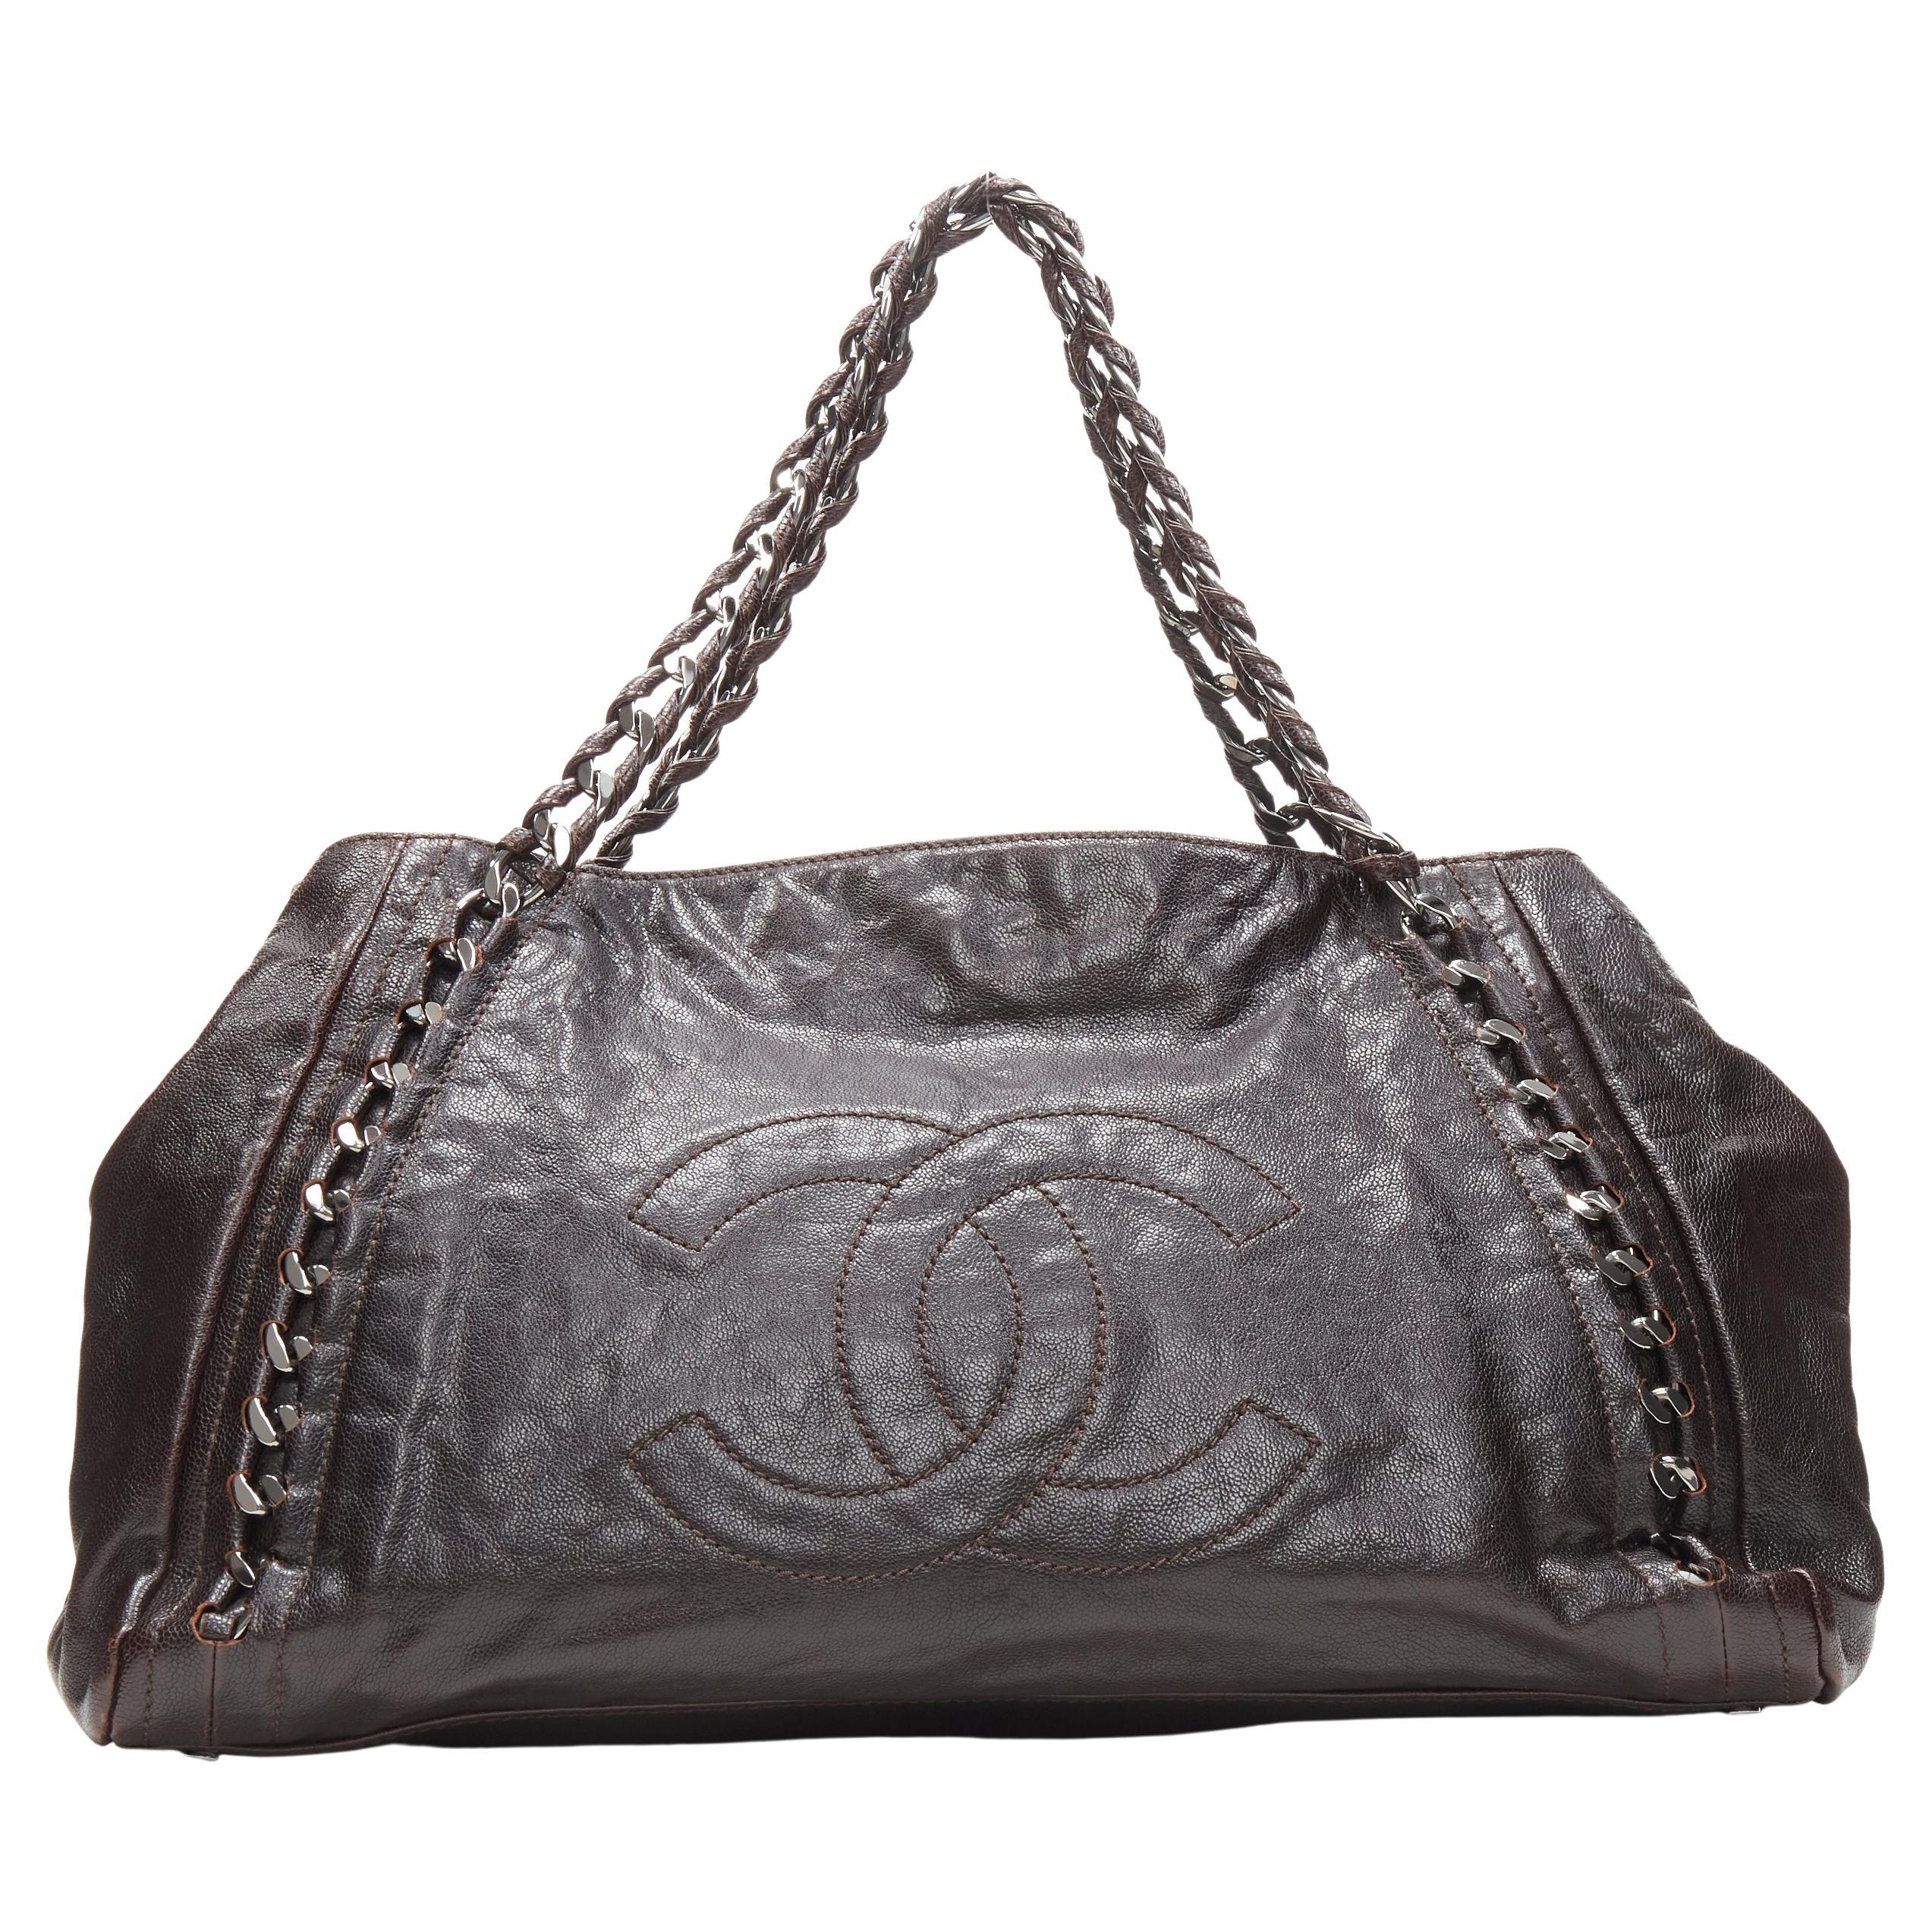 quilted flap bag with chain